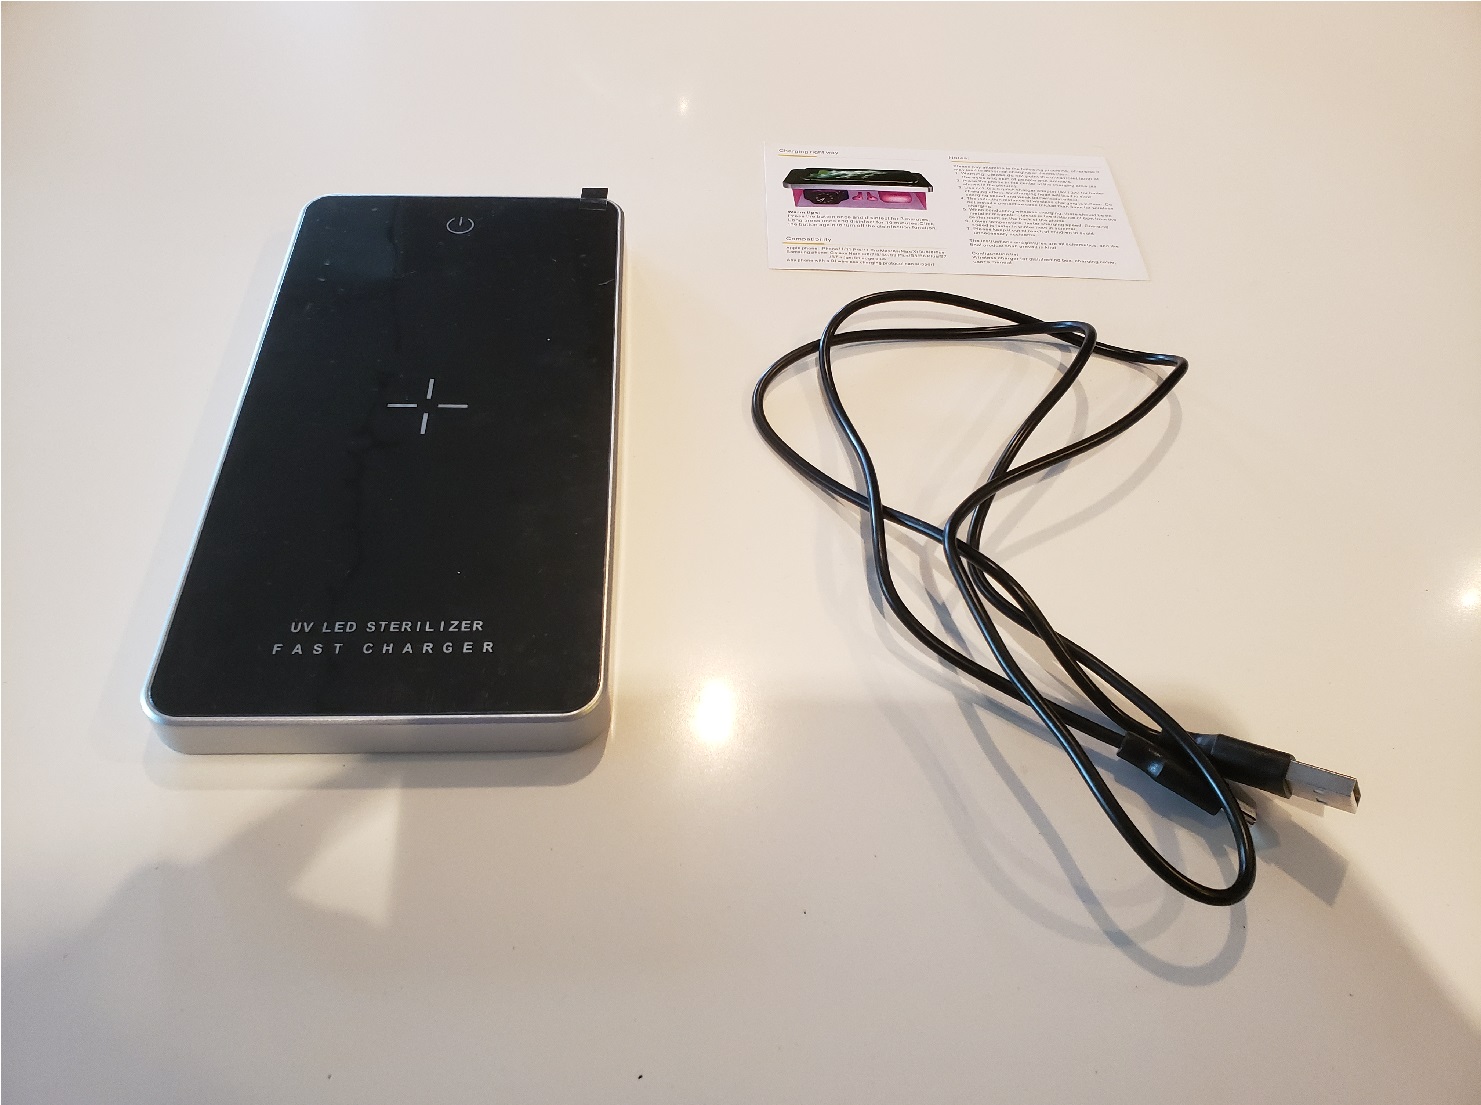 image of the UV sterilizer, USB-C cable, and instruction card